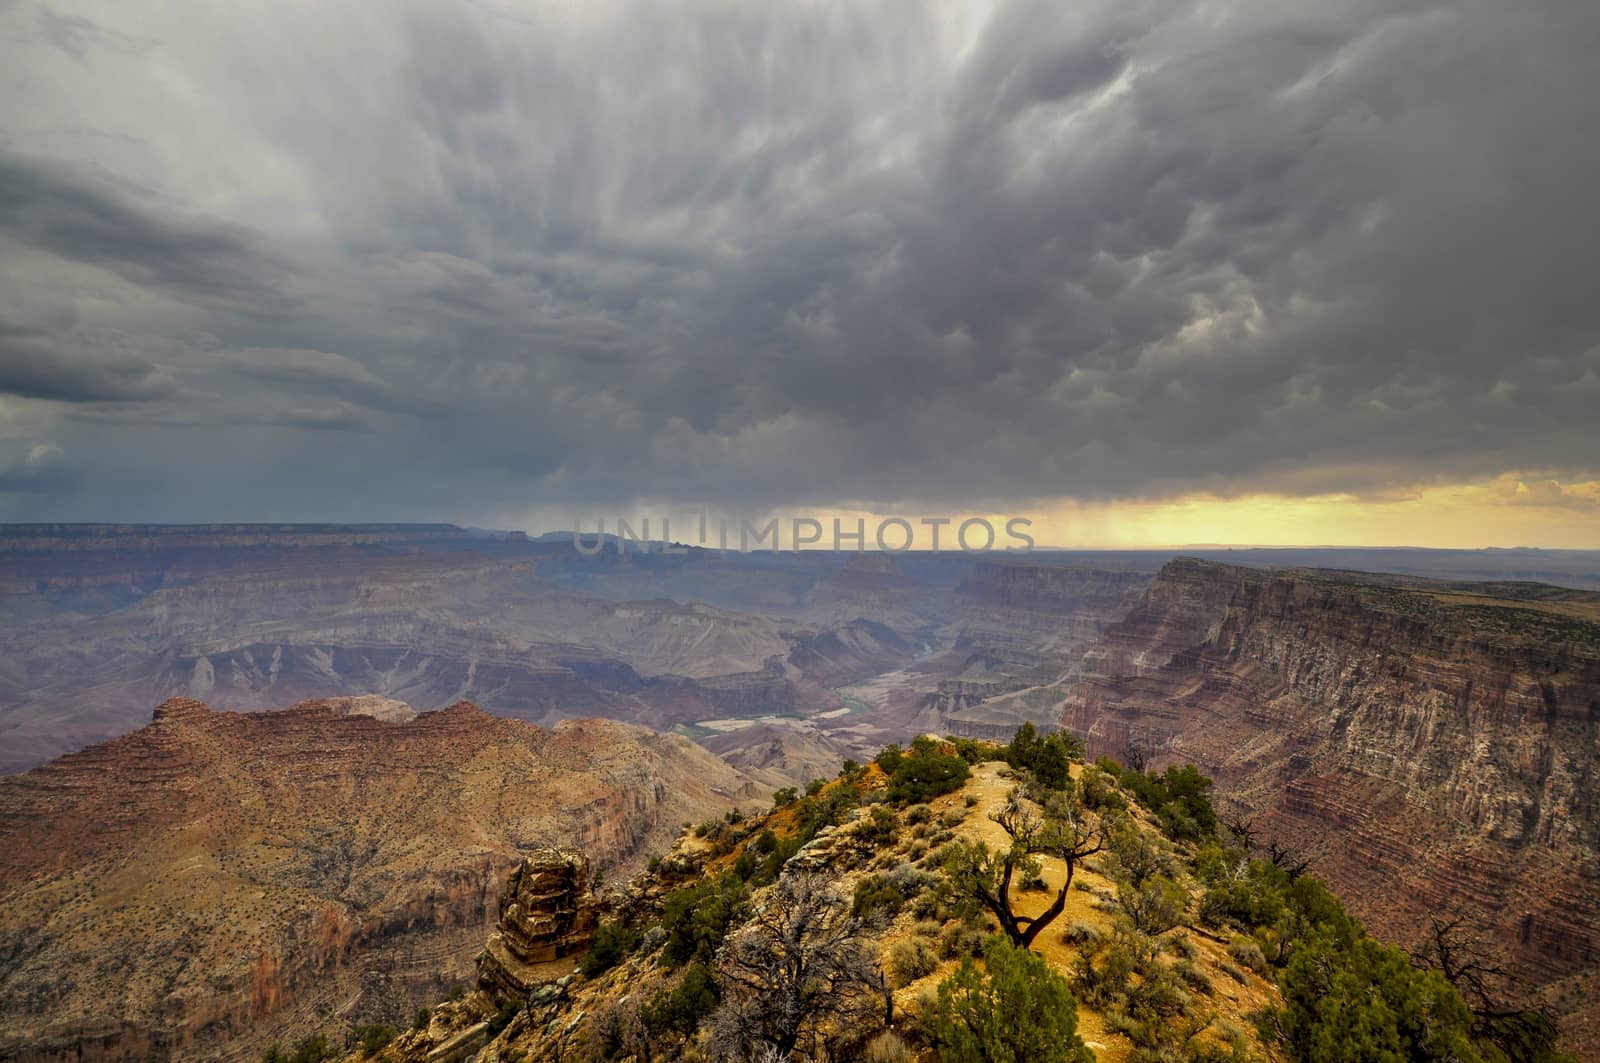 Clouds over Grand Canyon by MichaelMou85